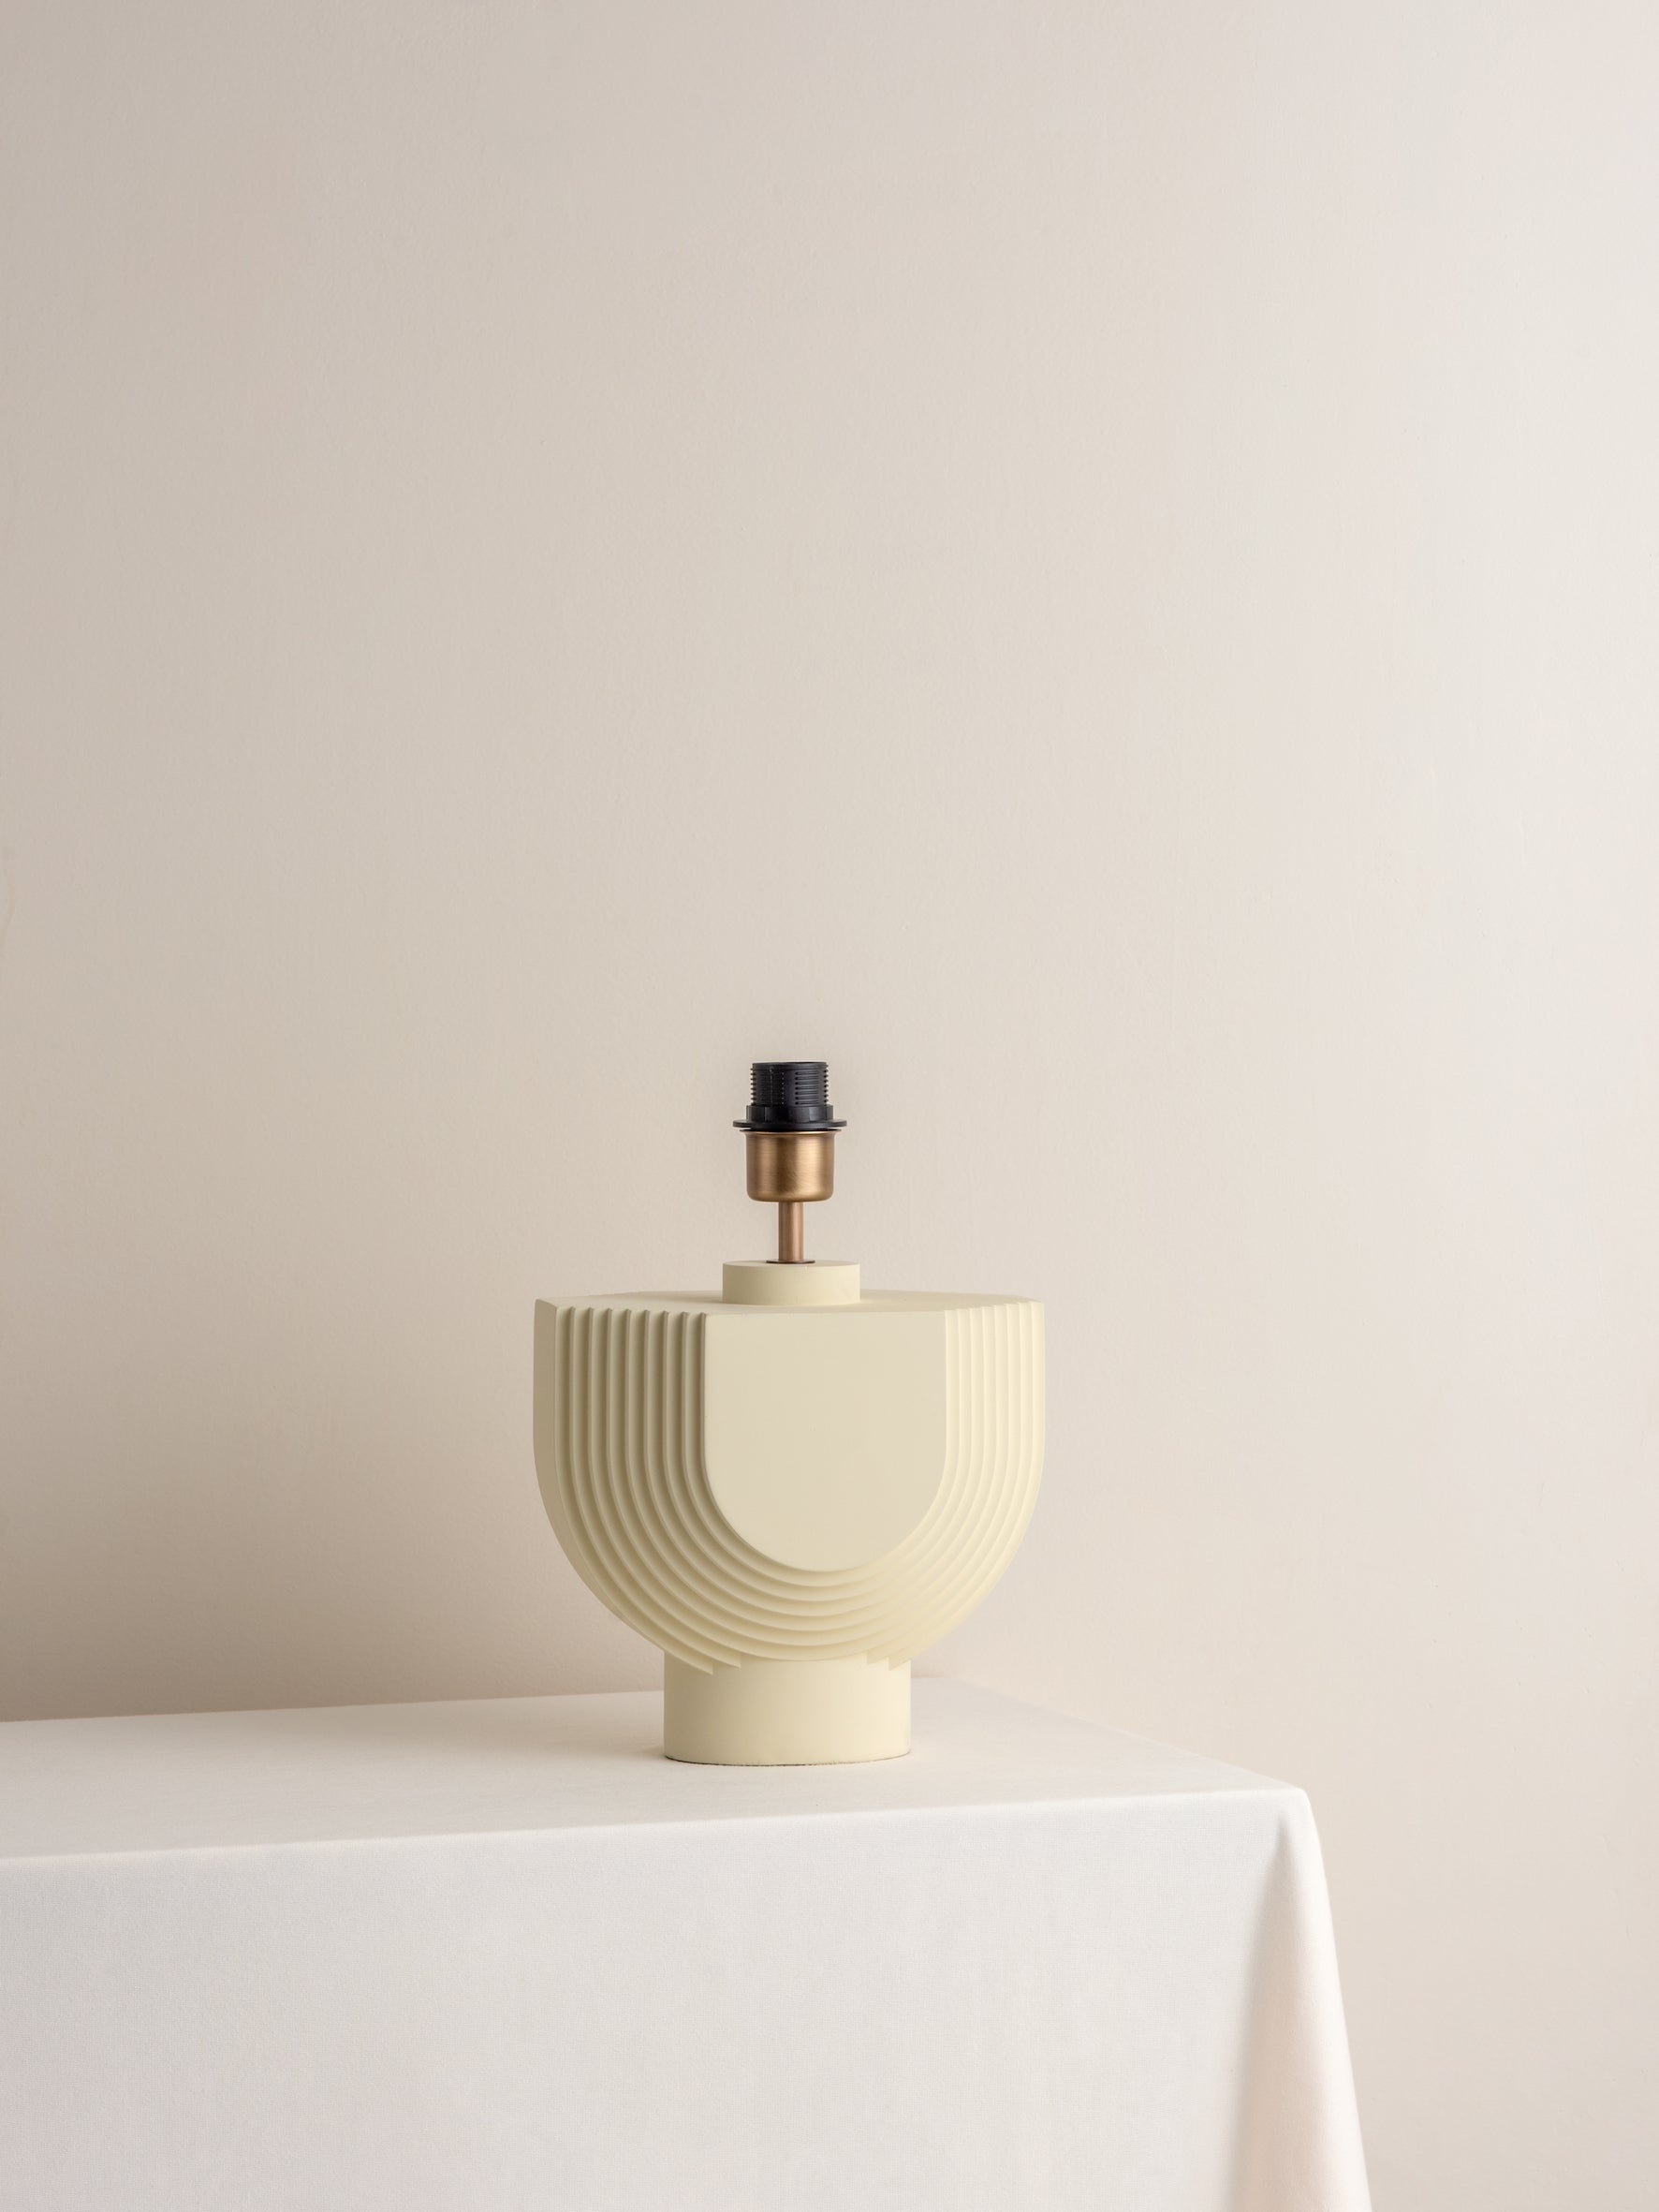 Editions concrete lamp with + aged brass shade | Table Lamp | Lights & Lamps Inc | Modern Affordable Designer Lighting | USA